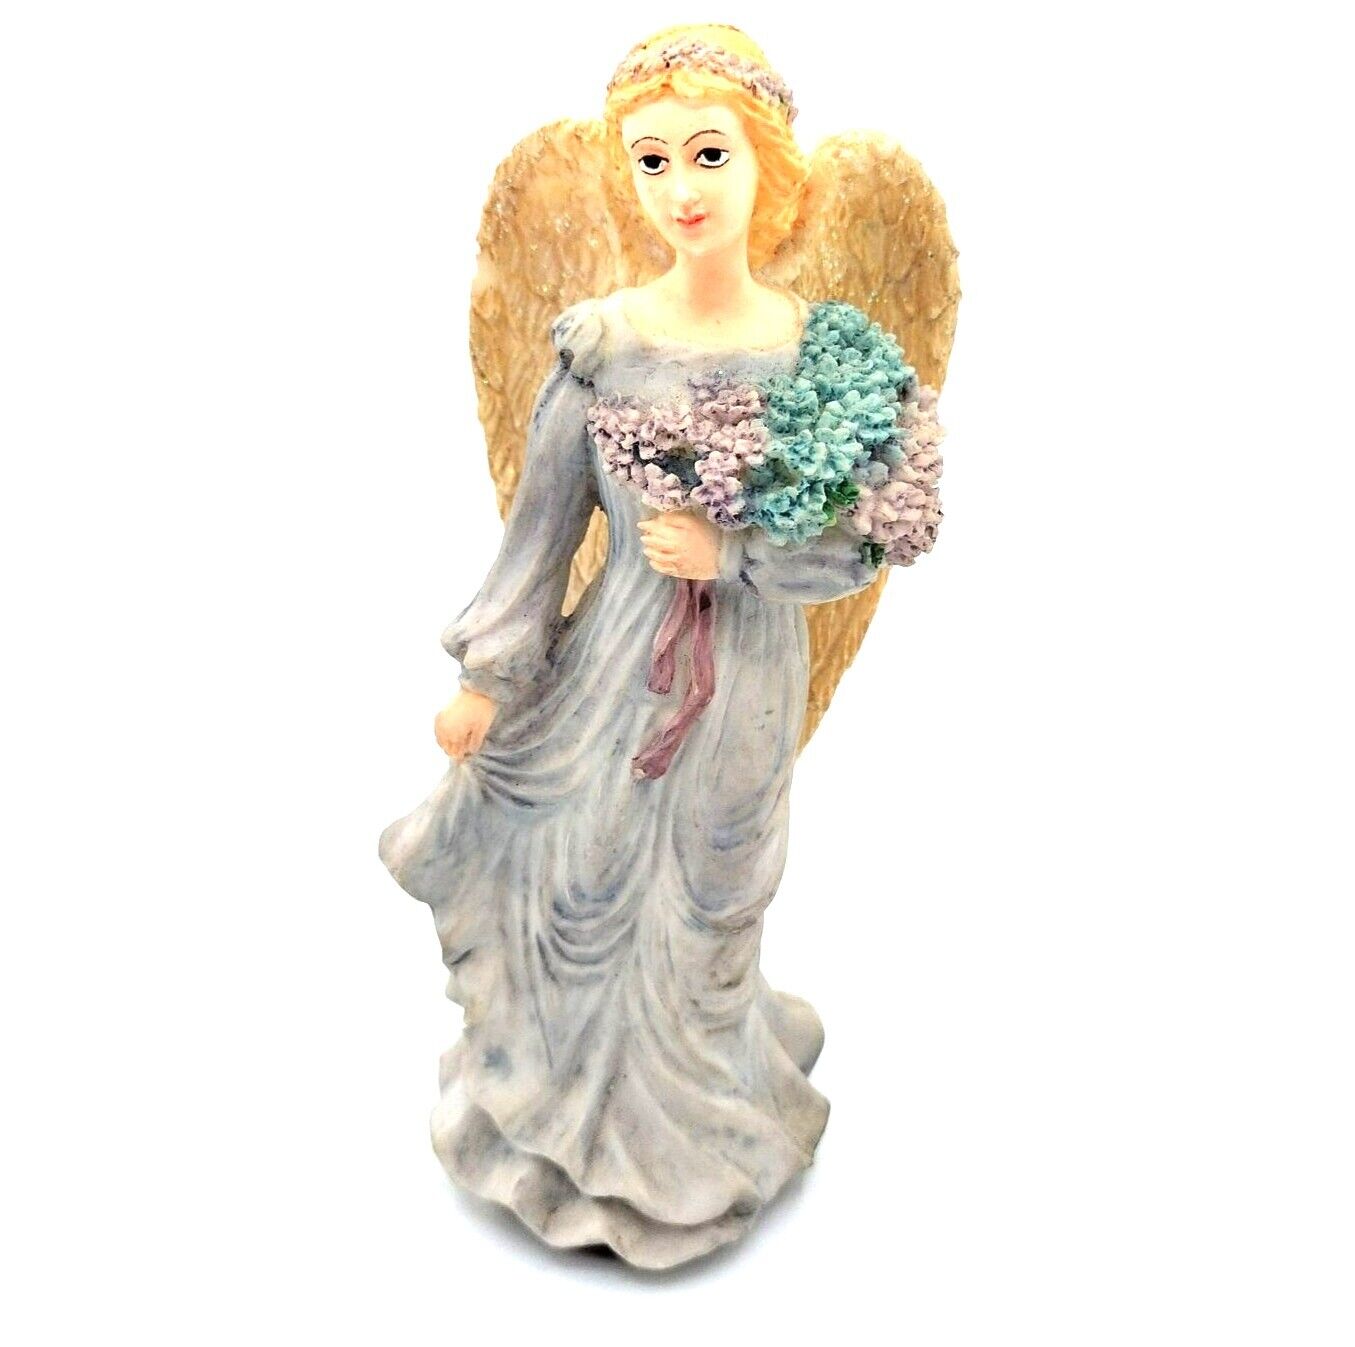 Angel Figure Holding Flower Bouquet by Abbey Press Religious Figurine Artistic